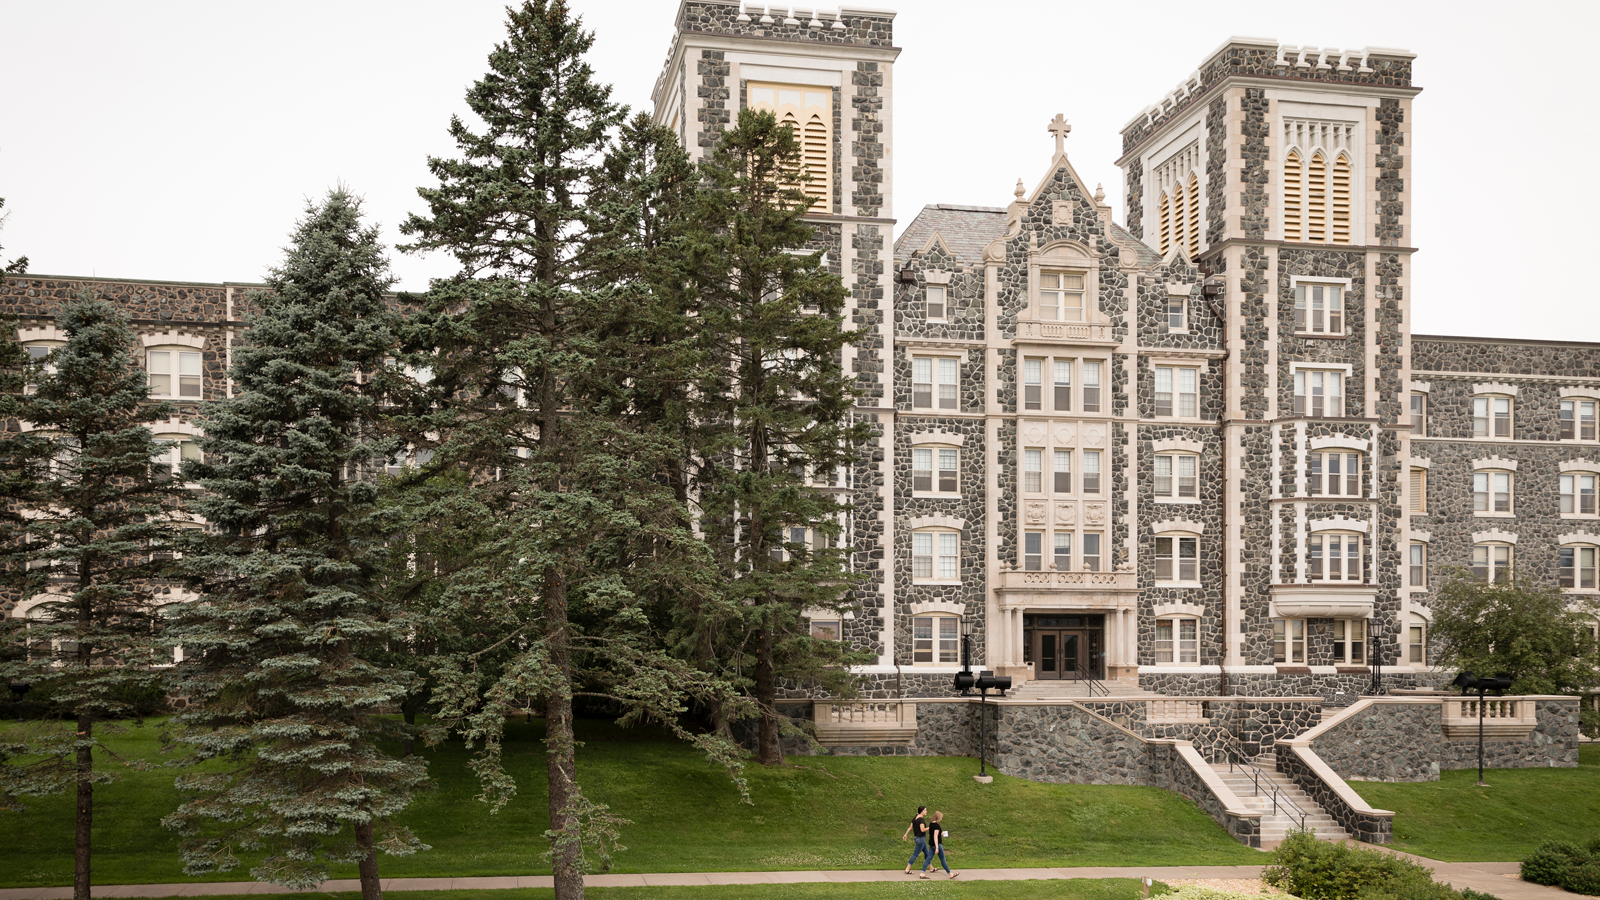 St. Cloud - The College of St. Scholastica